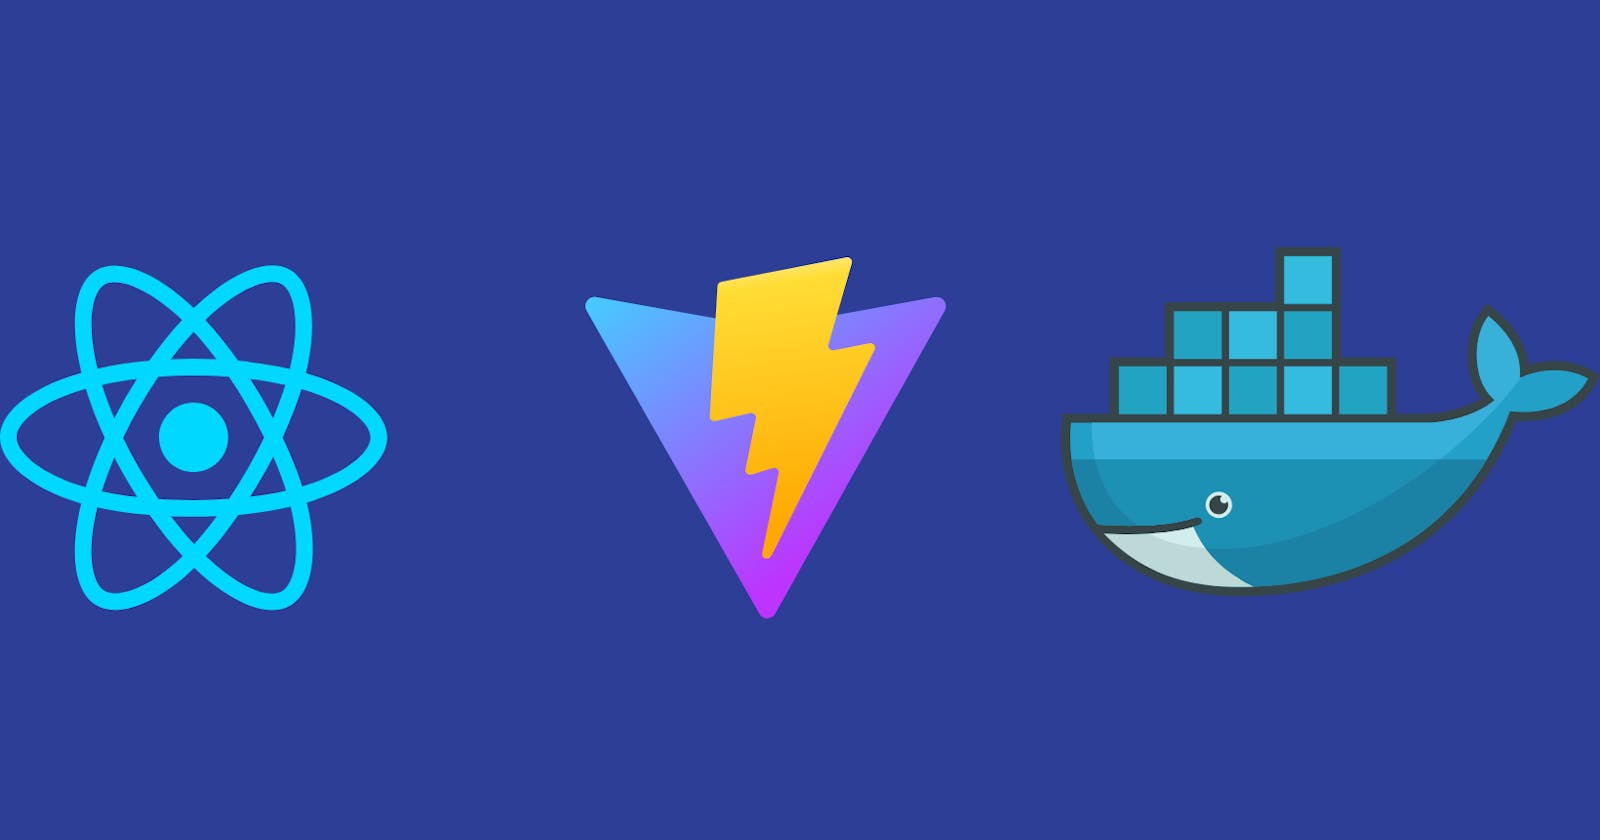 A Beginner's Guide to Dockerizing React Applications Built with Vite